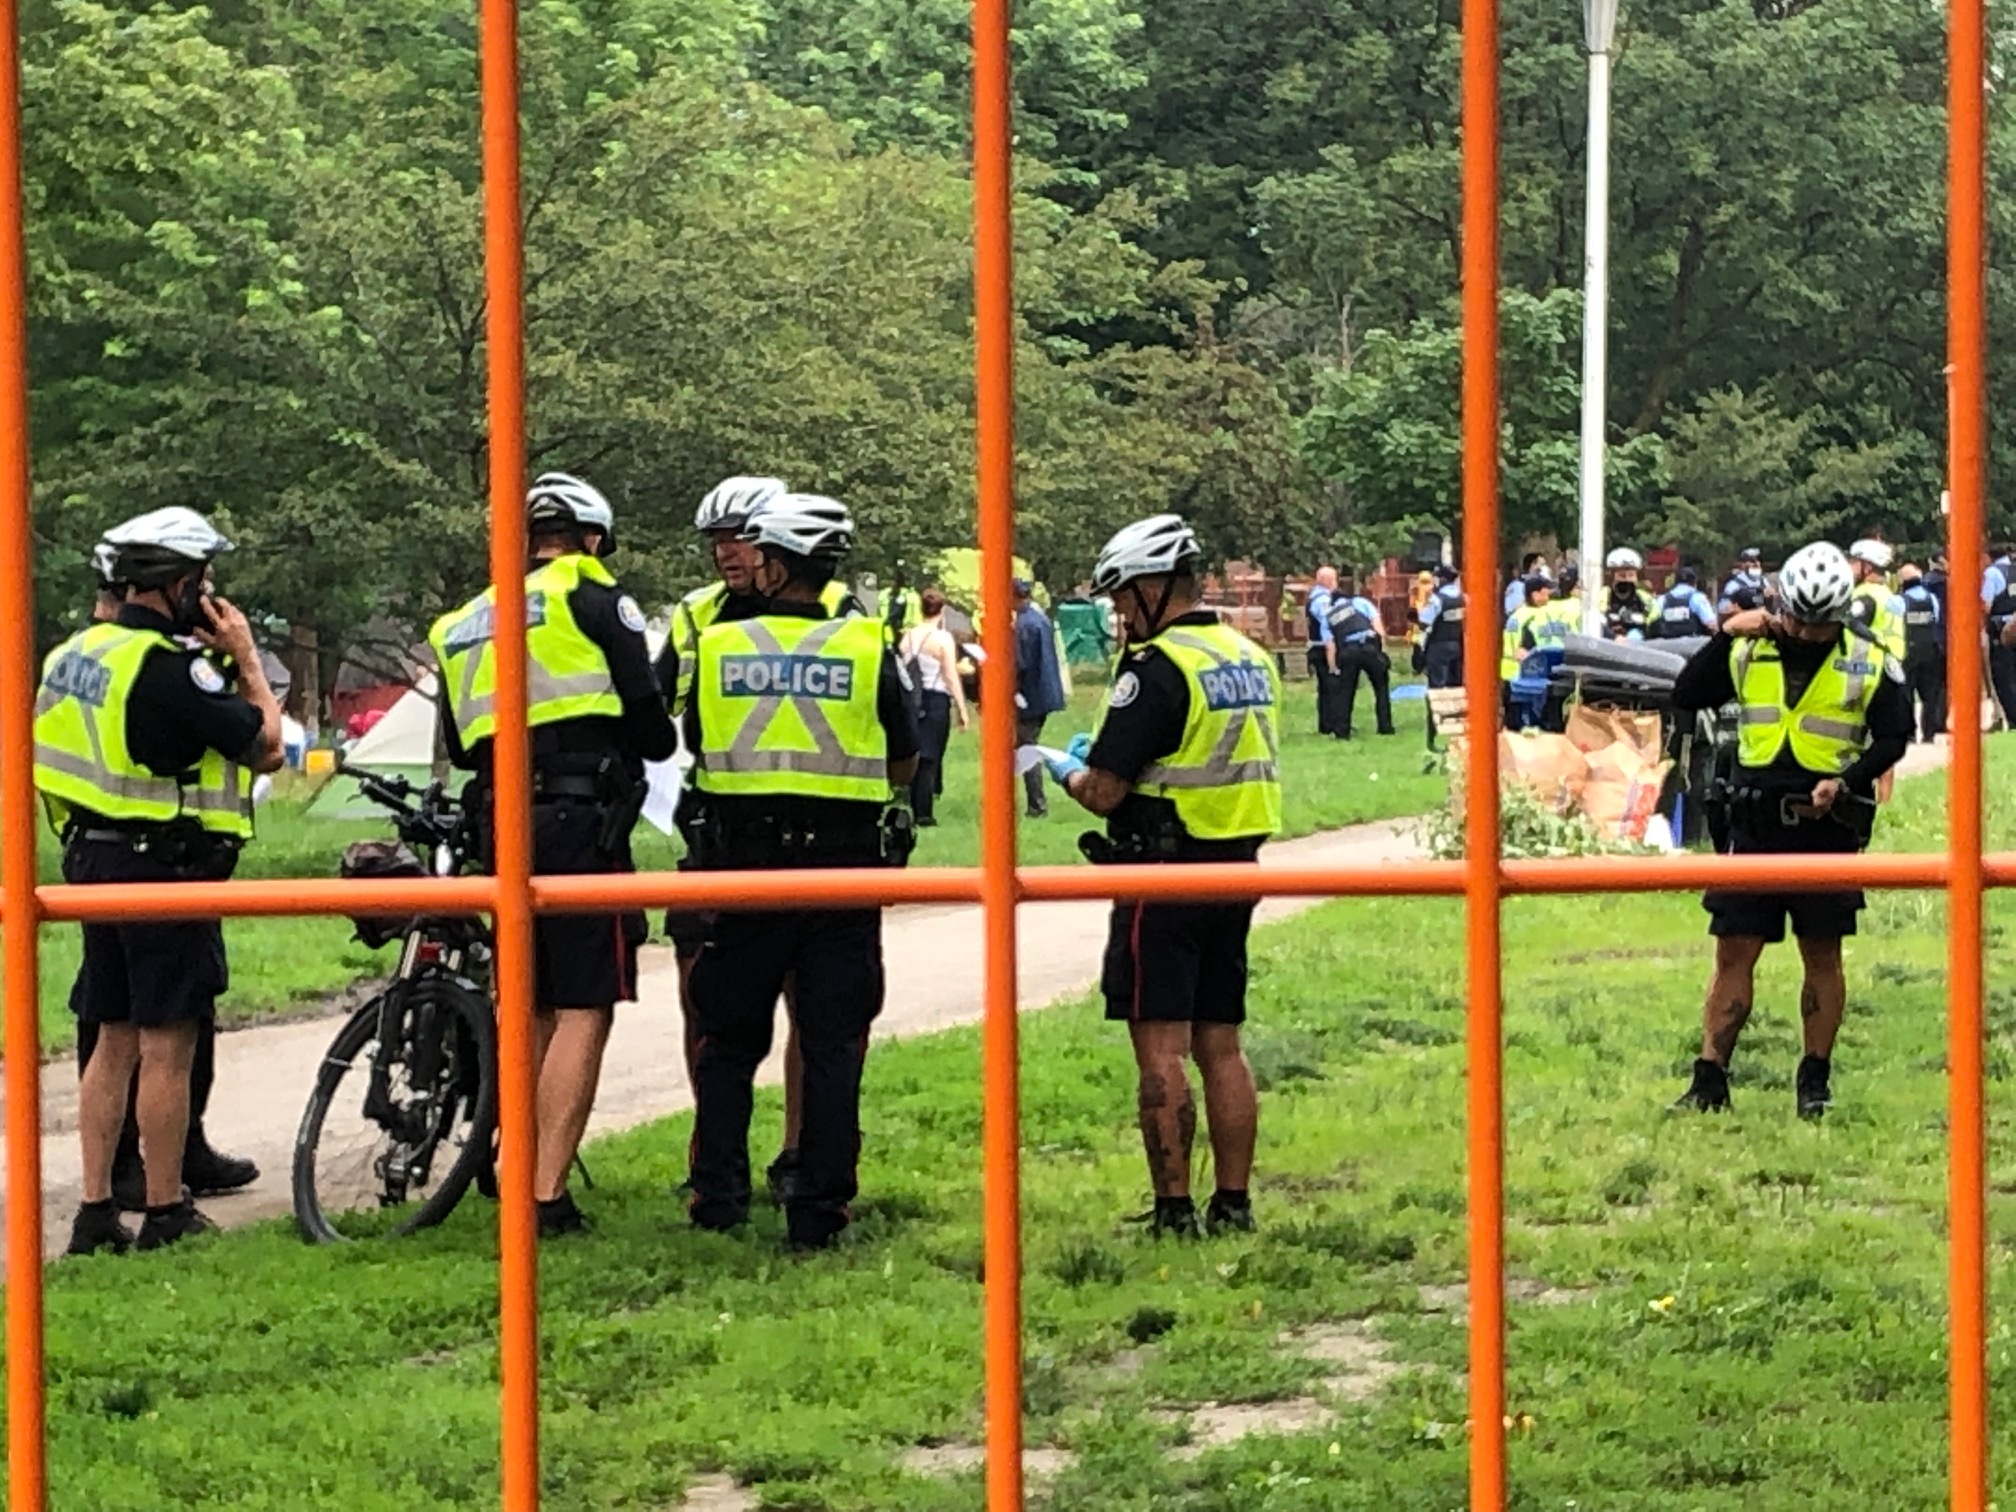 Toronto police and security personnel are seen through an orange fence during the eviction. Image: Rafi Aaron/Used with permission